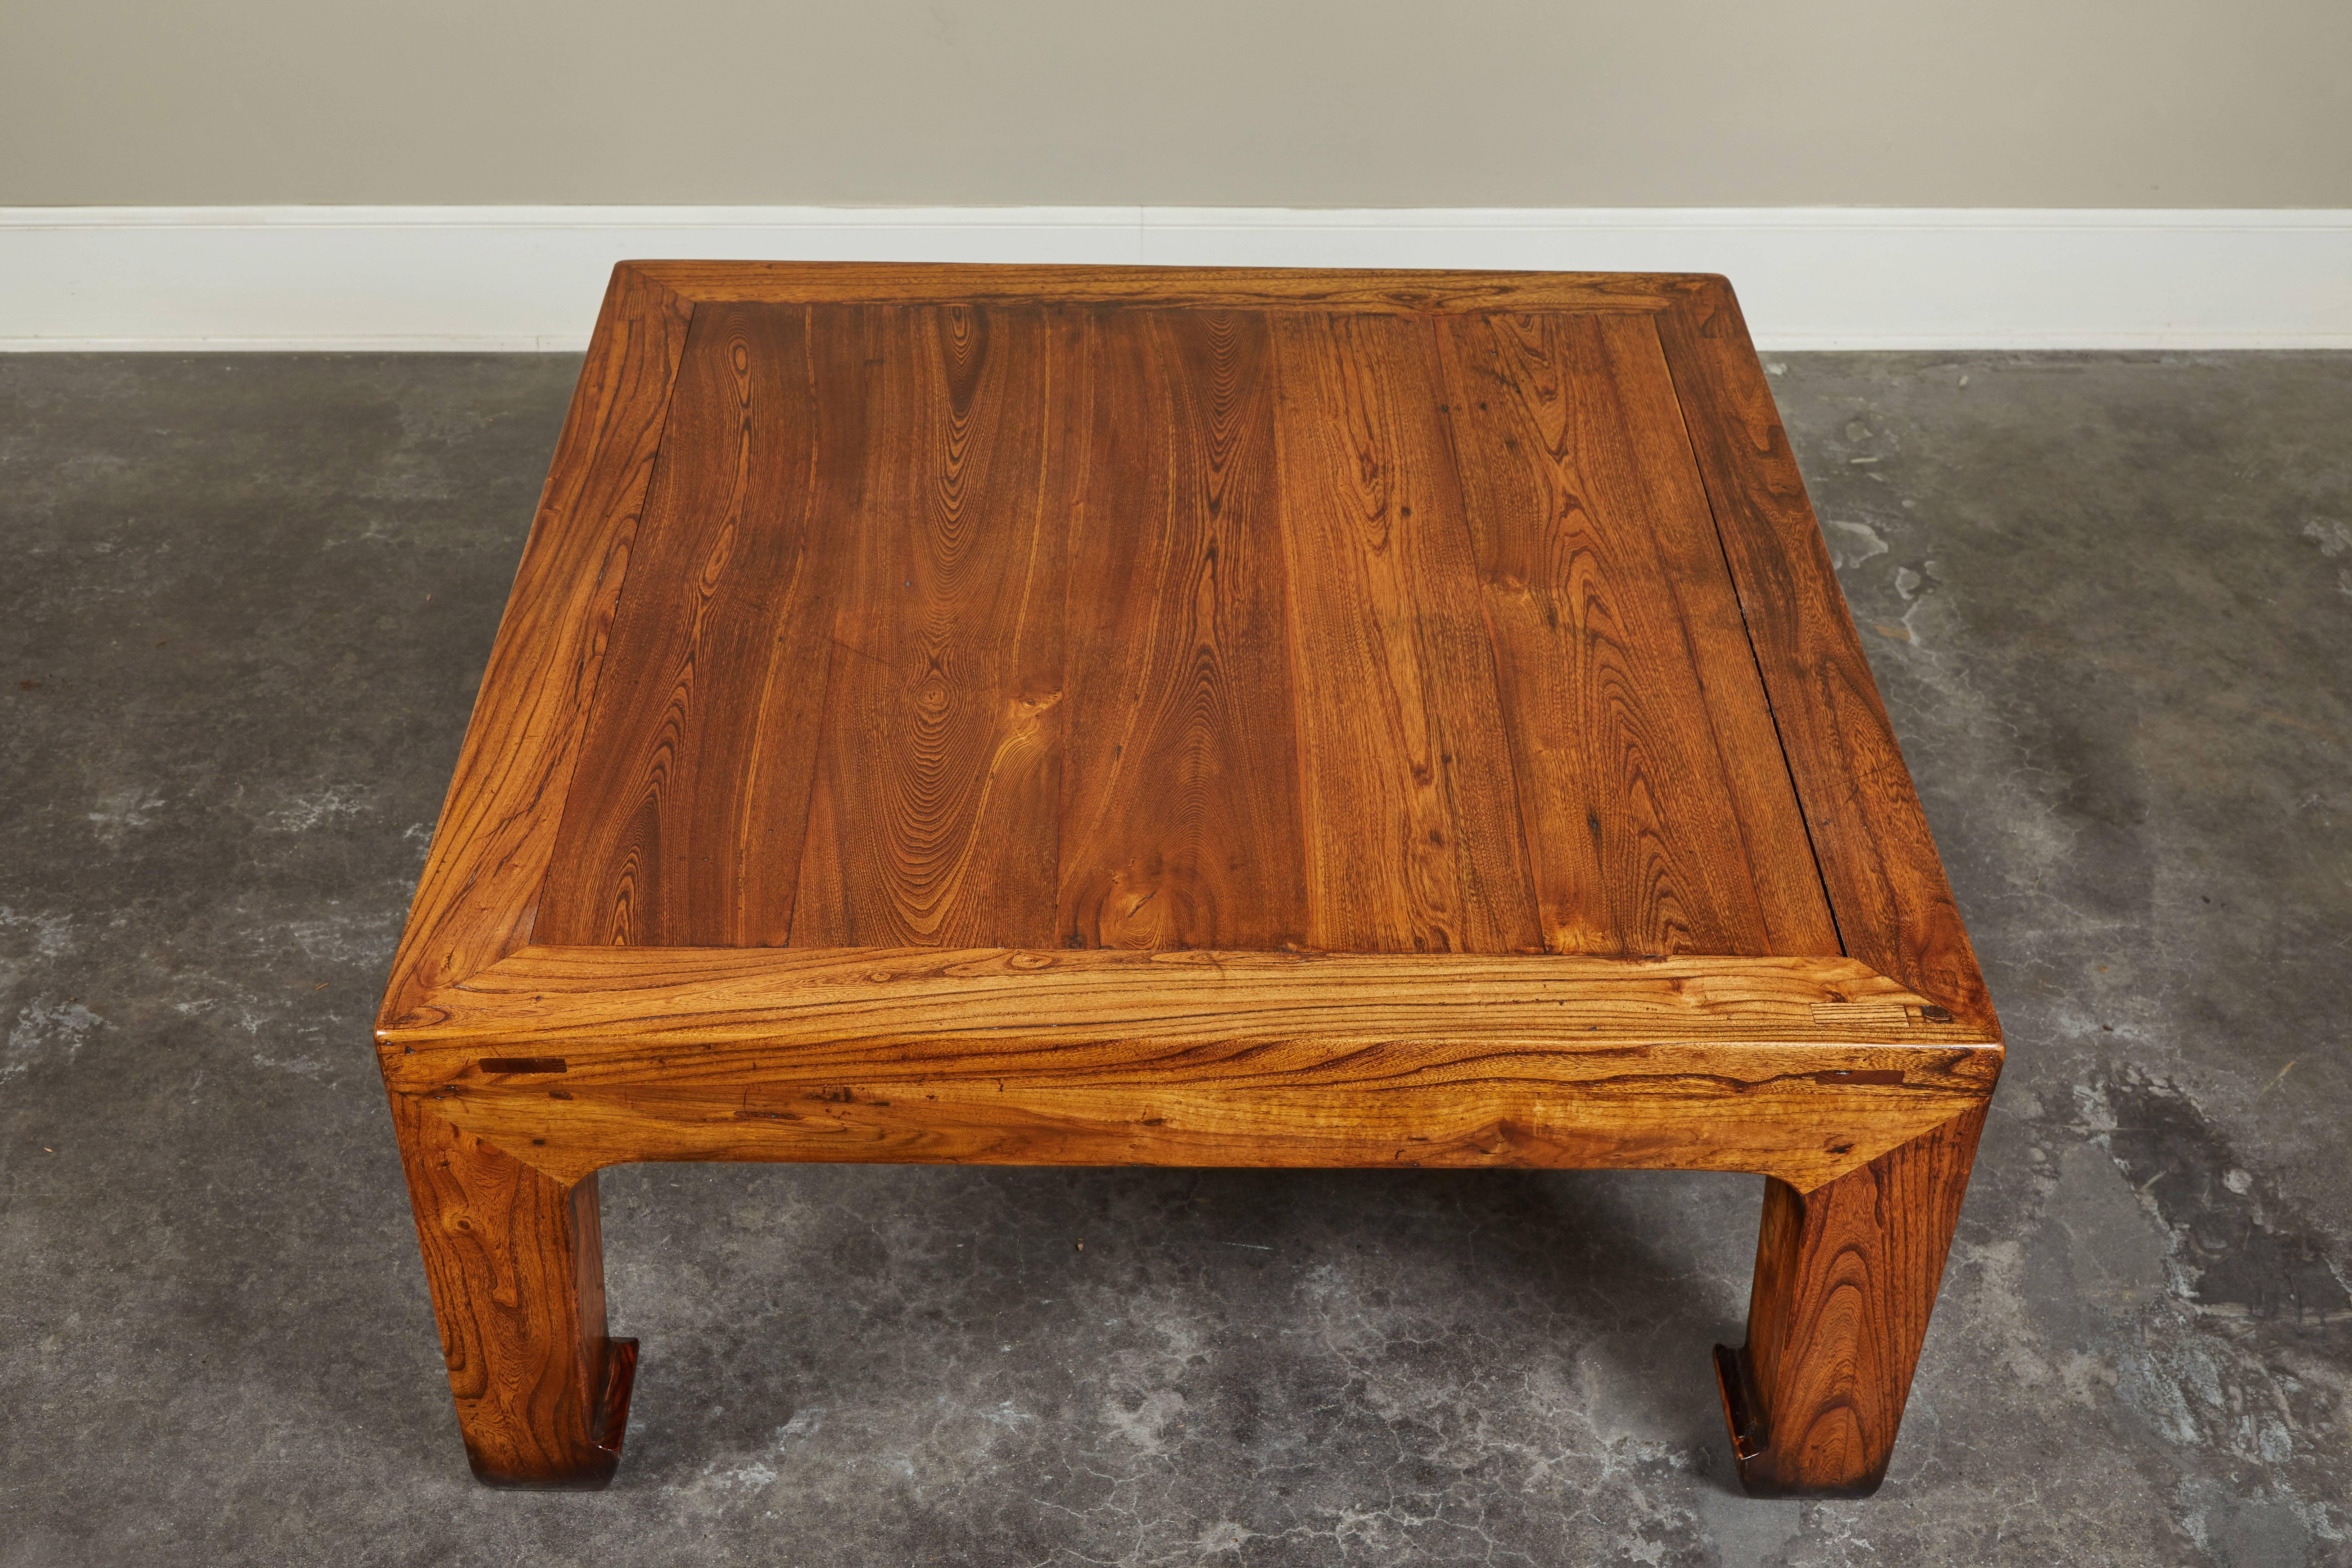 One of two similar Chinese elm coffee tables, re-imagined from salvaged pieces of an antique bed. Could be paired with a similar piece (ref:LU868810760871).